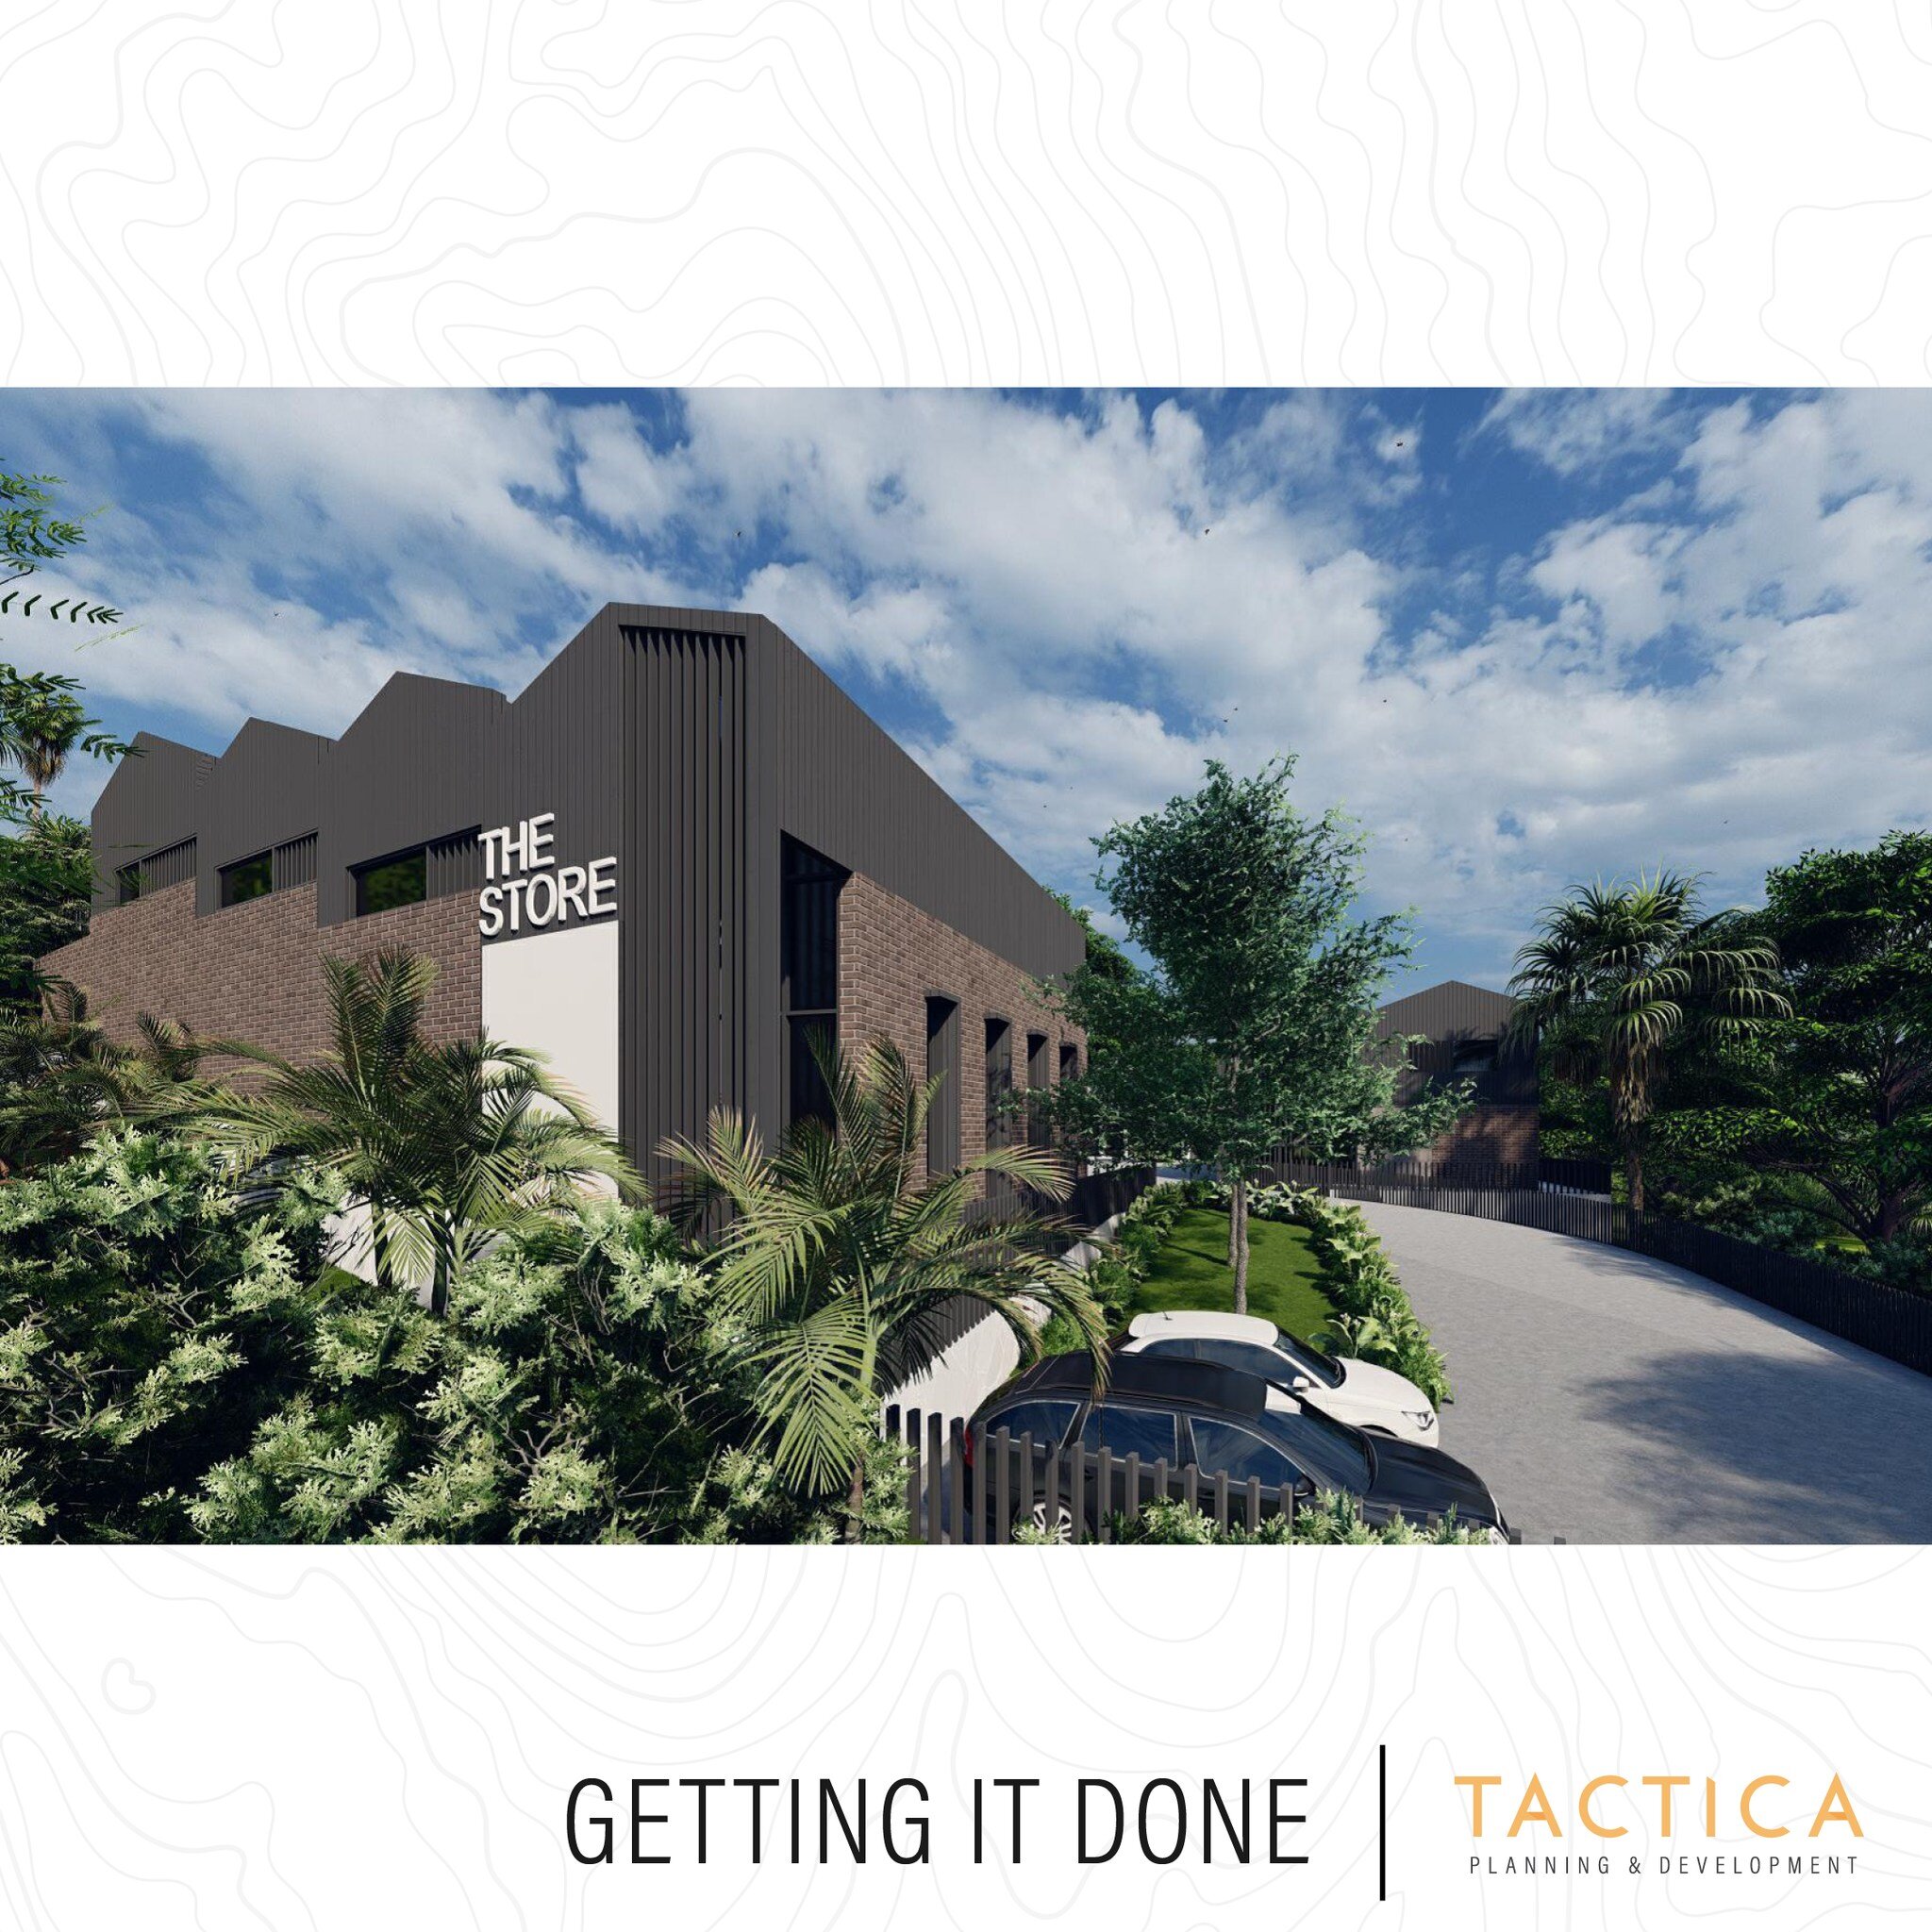 Approved! Man-cave/self-storage is a-coming. All boats and cars rejoice you can have your own accommodation.
.
#tacticaplan #planning #goldcoast #tacticaplanning&amp;development #townplanning #urbanplanning #development #goldcoastplanning #goldcoastd